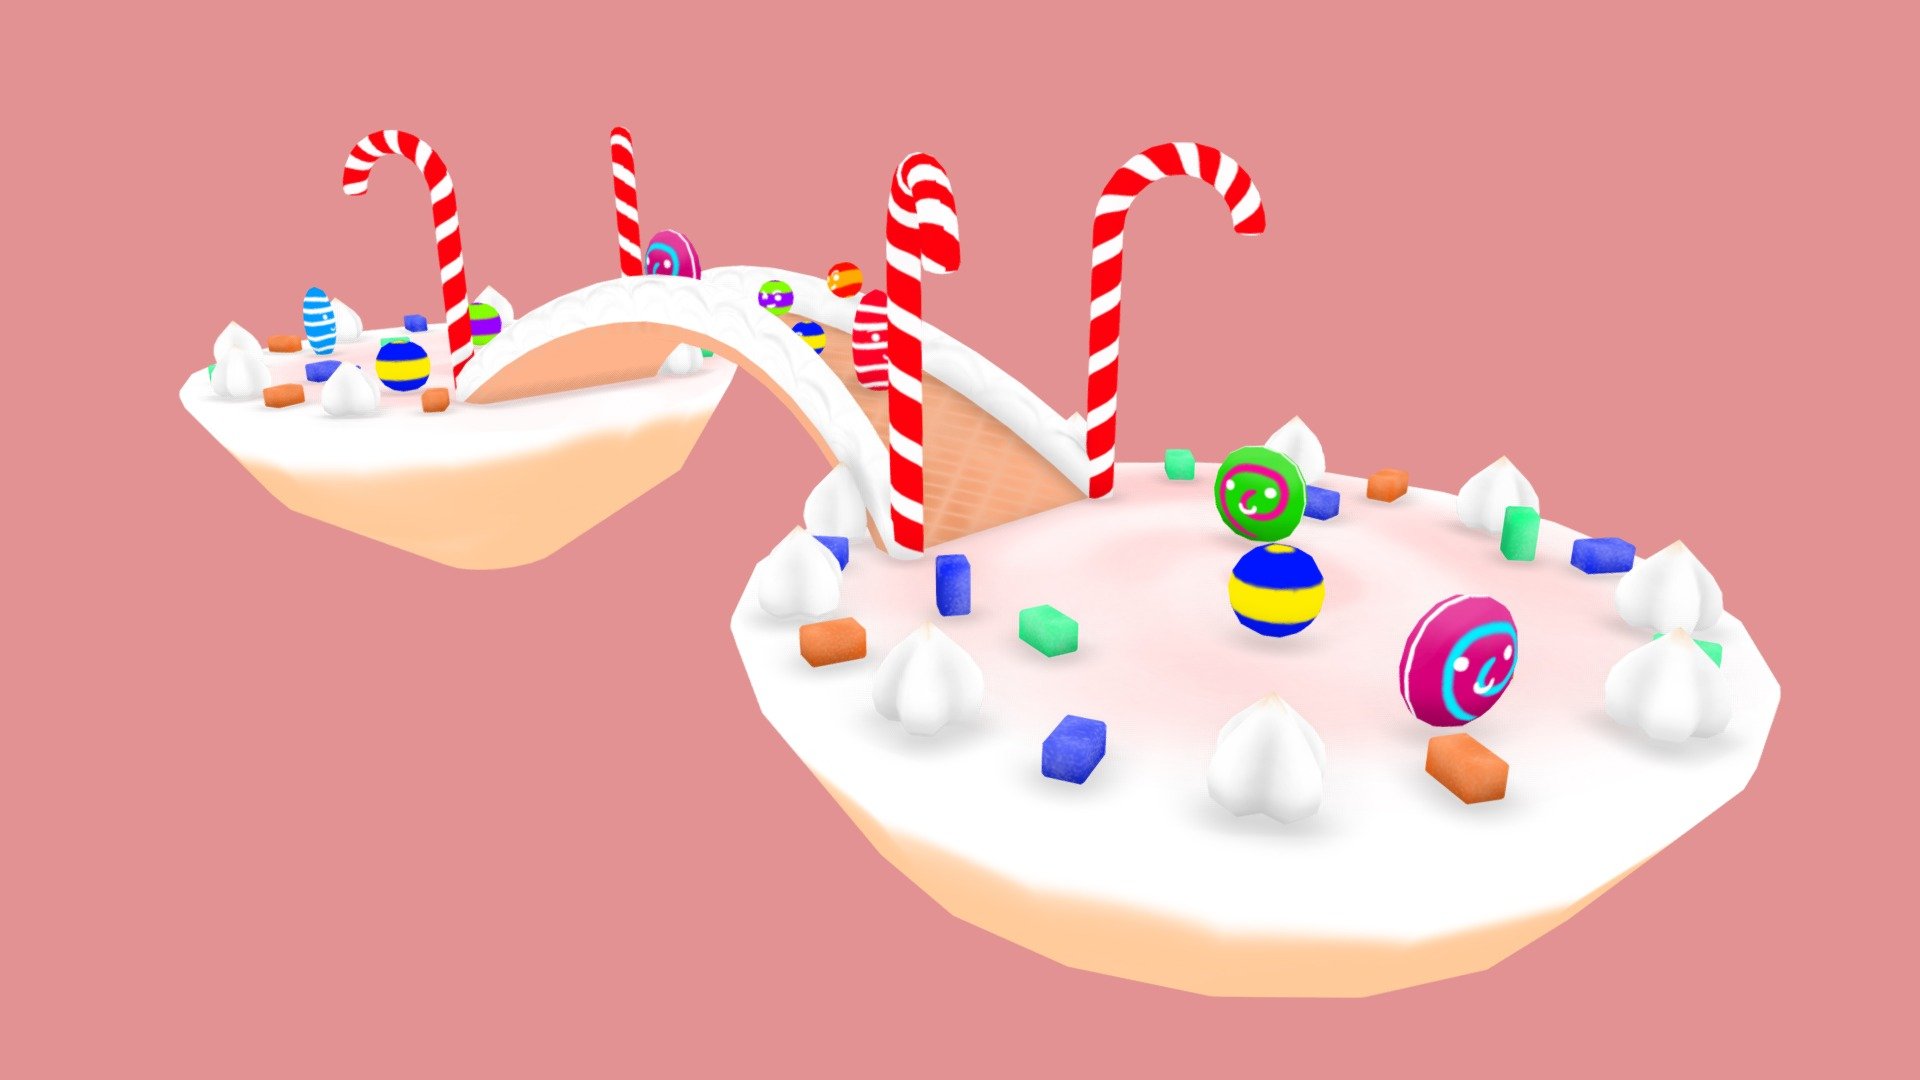 A cute candy realm, with islands and bridges made of candies - Candy | #3December - 3D model by Zemasu 3d model